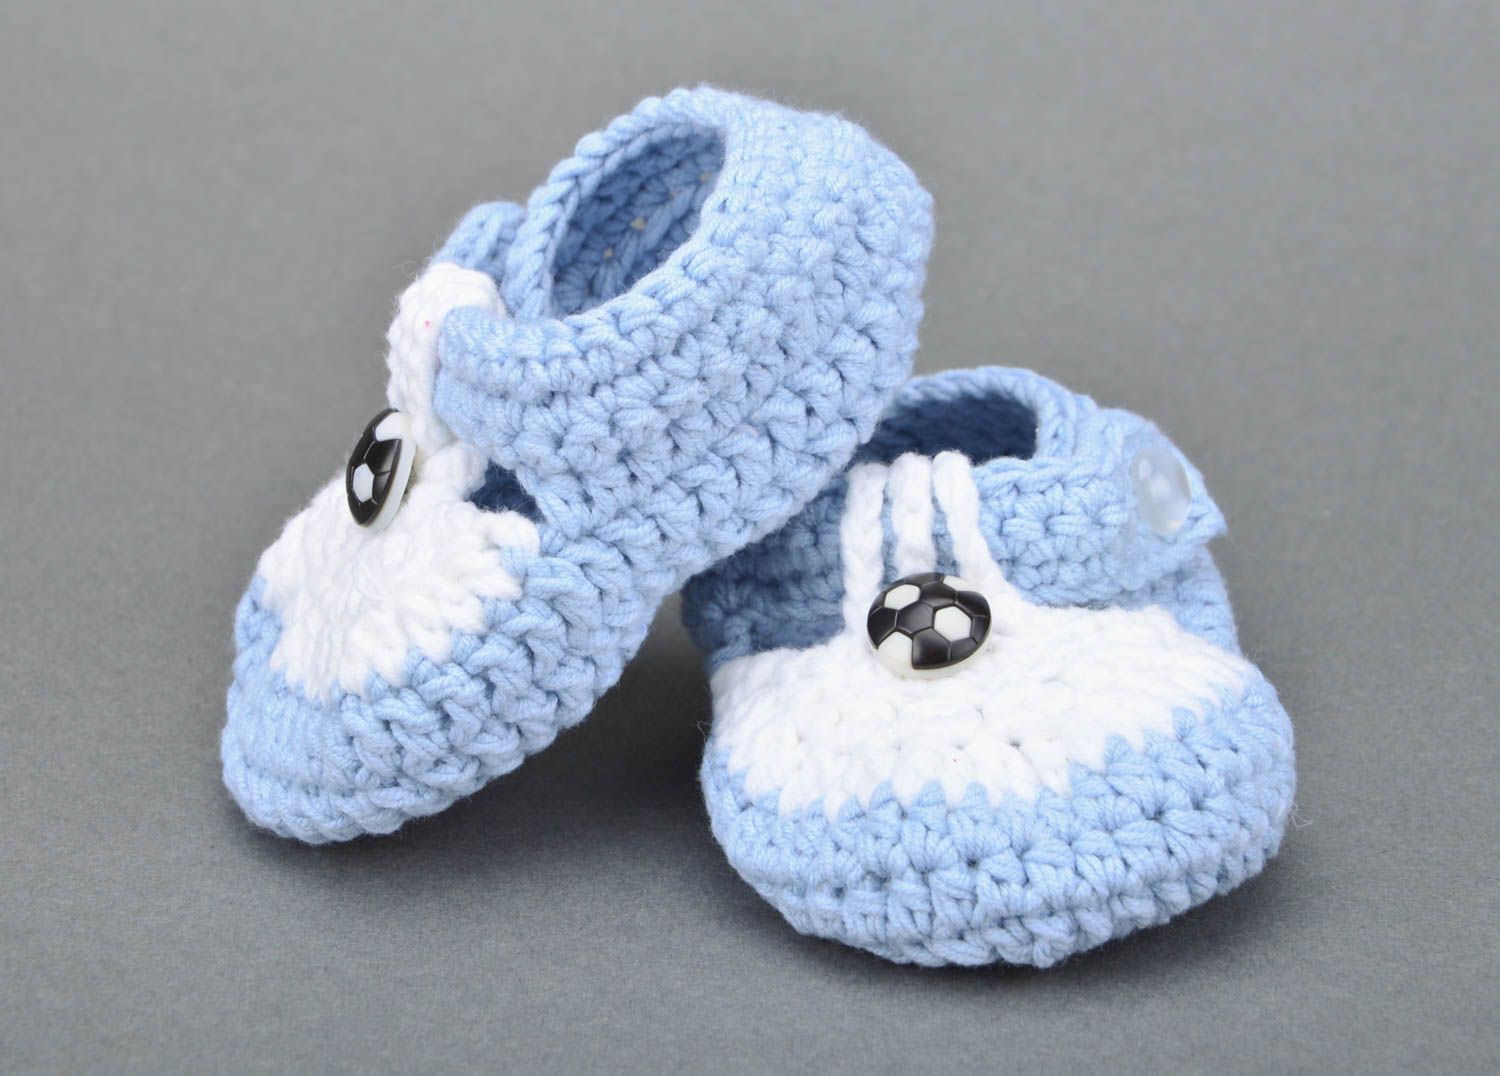 Handmade baby shoes crocheted of cotton and acrylic threads white and blue photo 3